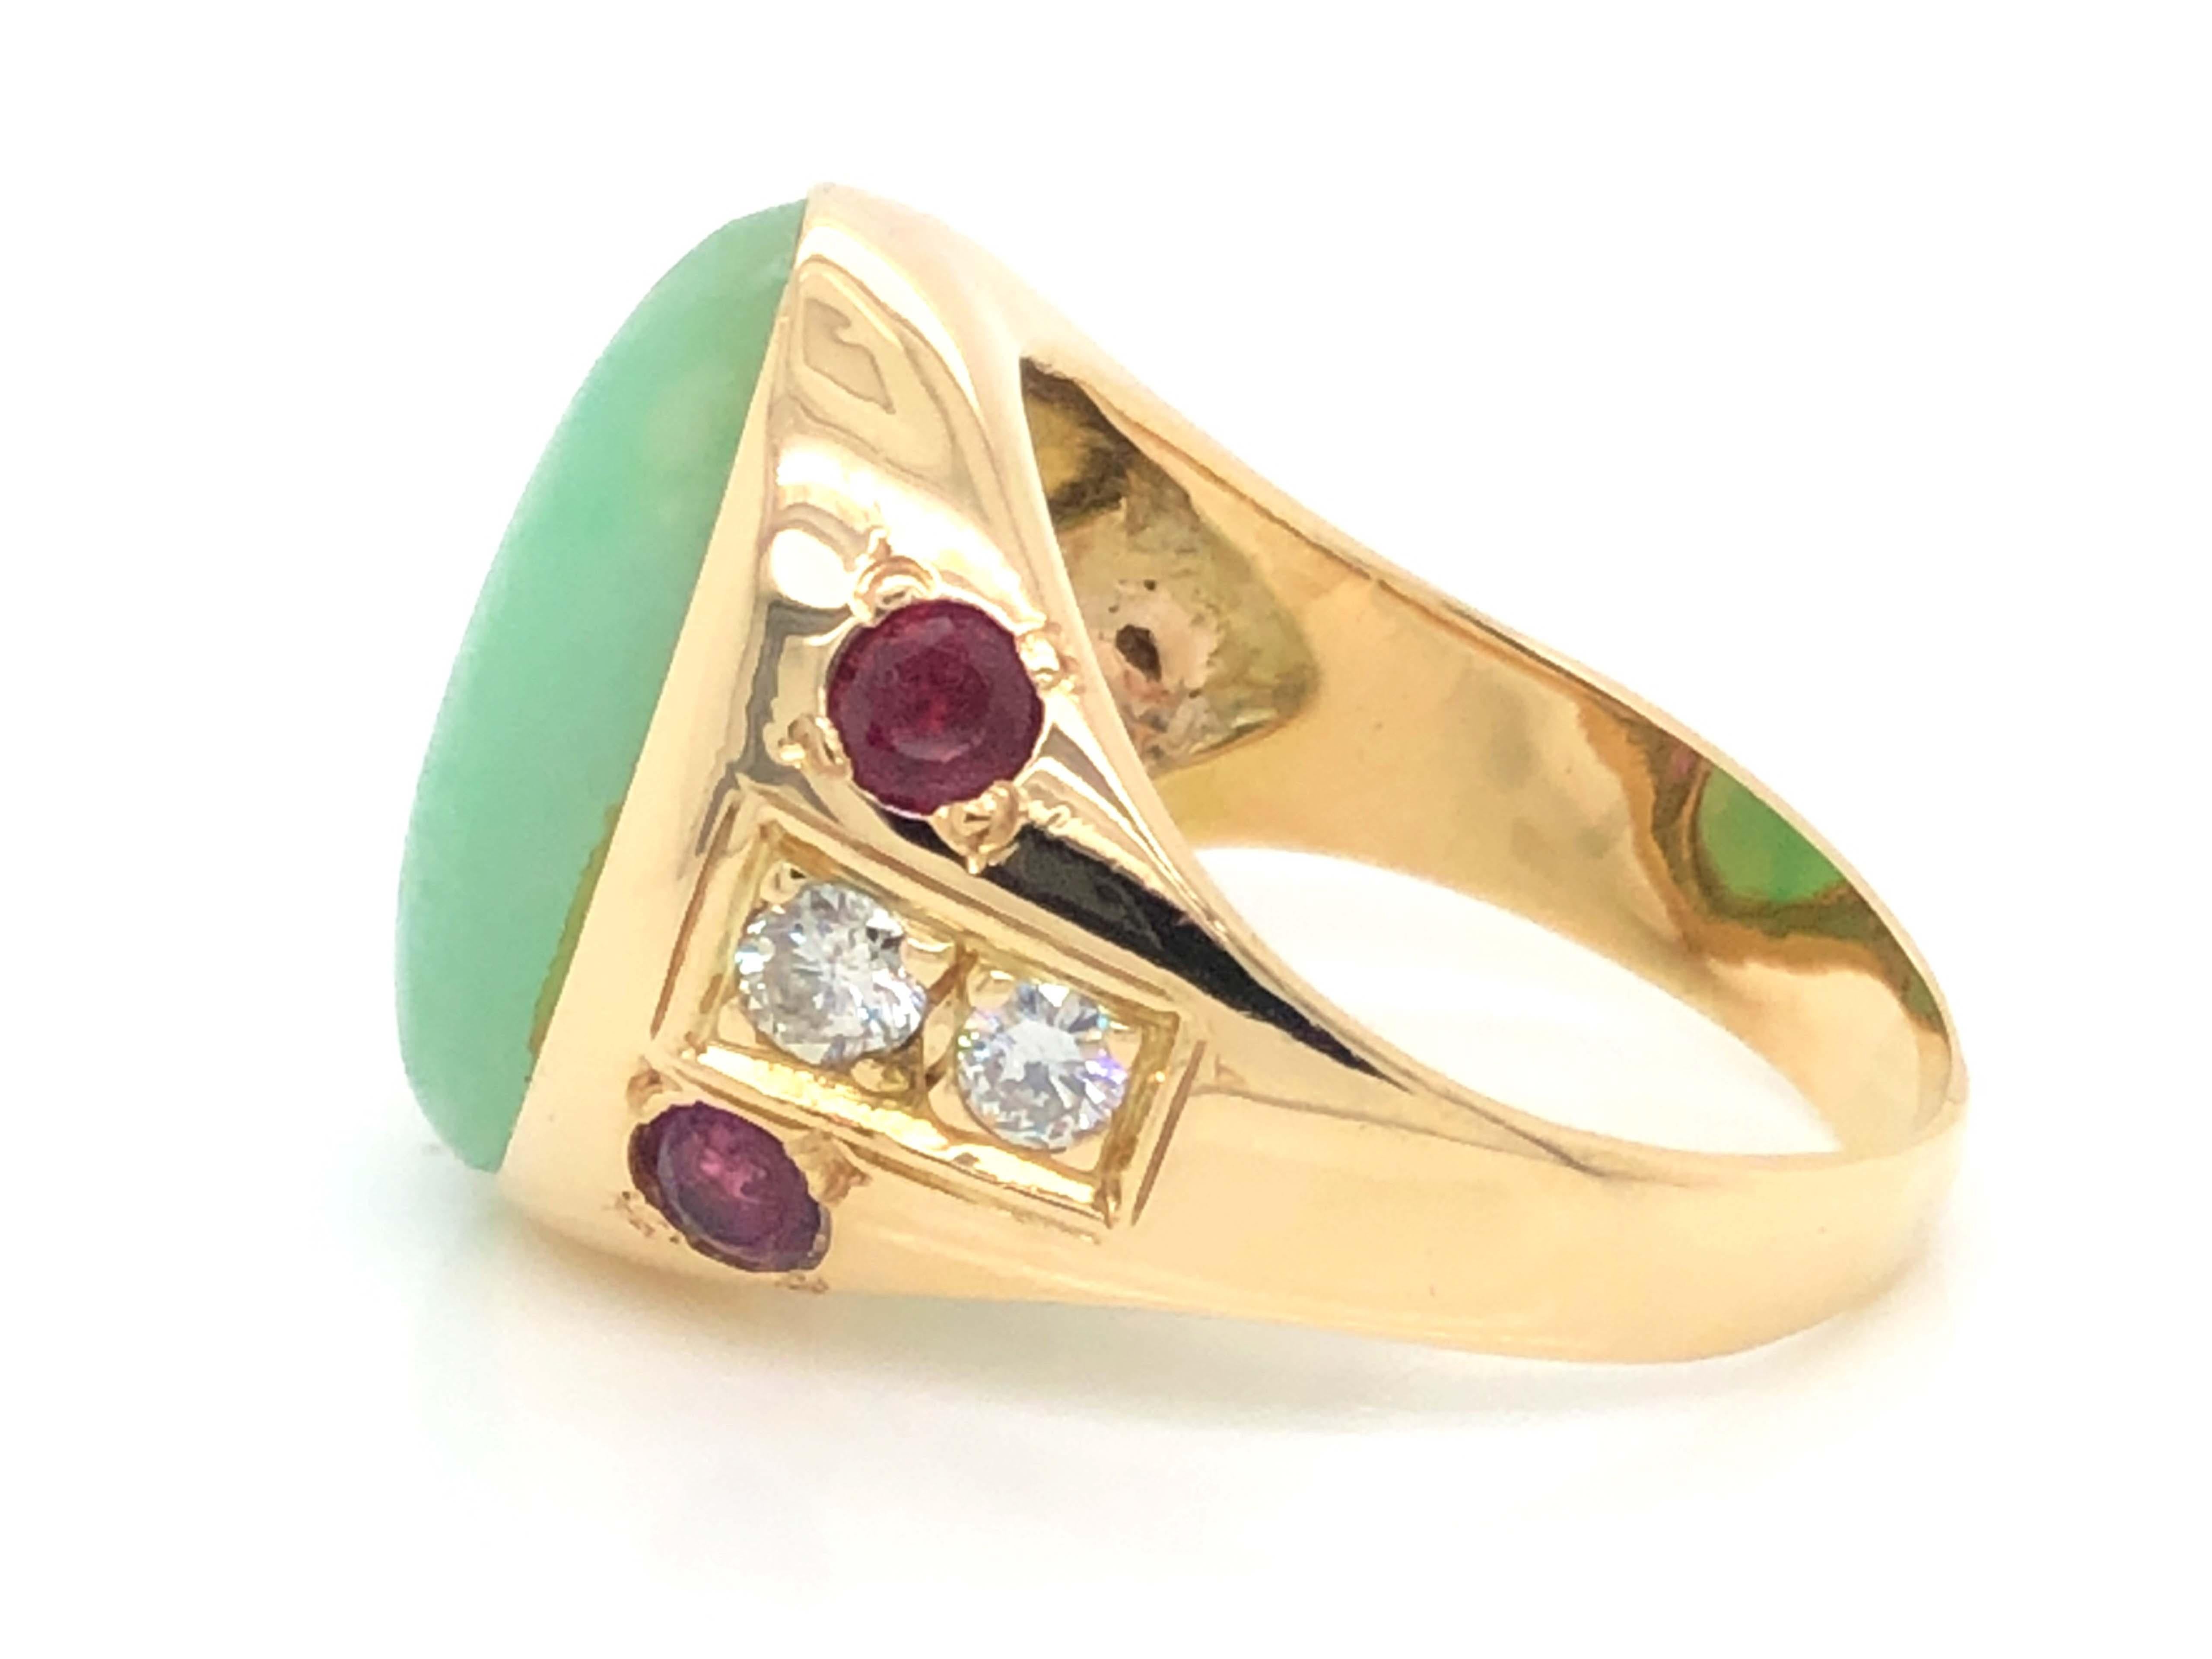 Modern Men's Oval Pale Mottled Green Jade, Diamond and Ruby Ring - 14k Yellow Gold For Sale